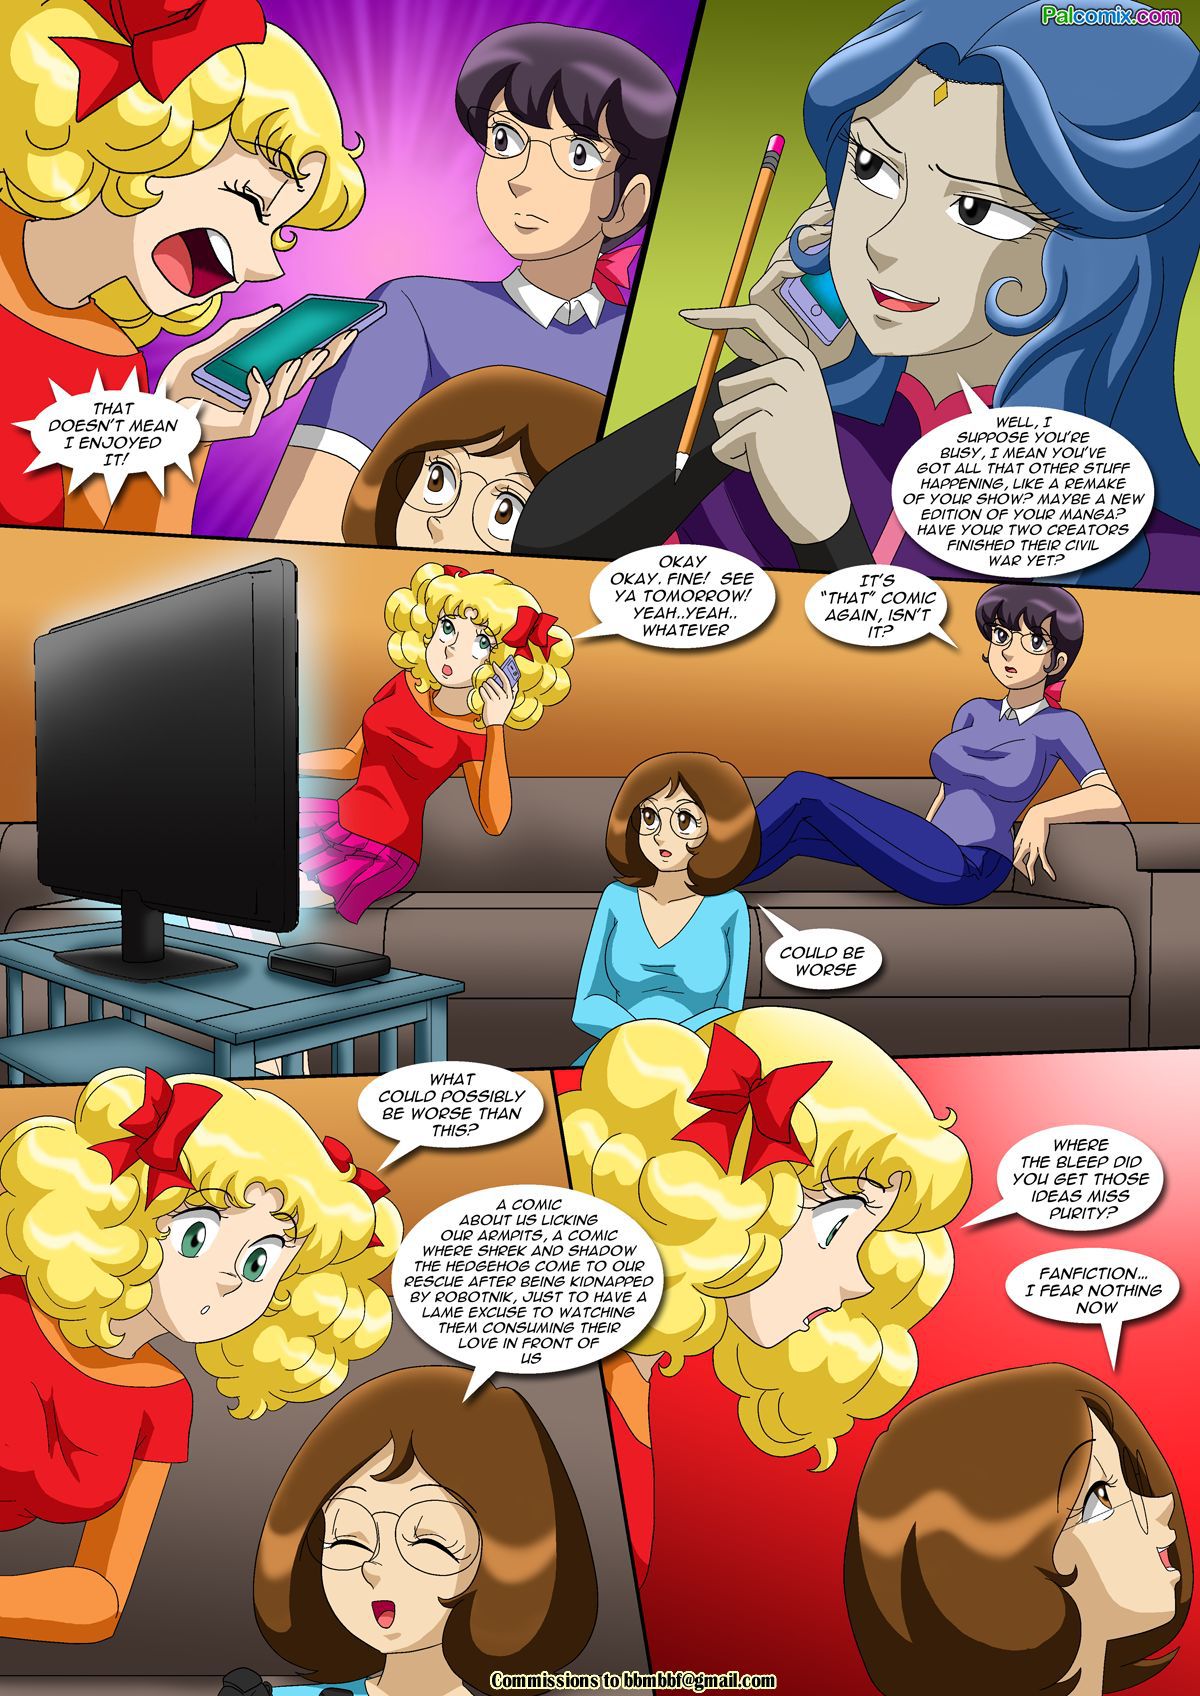 [Palcomix] Spoils of War 2 (Candy Candy) - ongoing 3